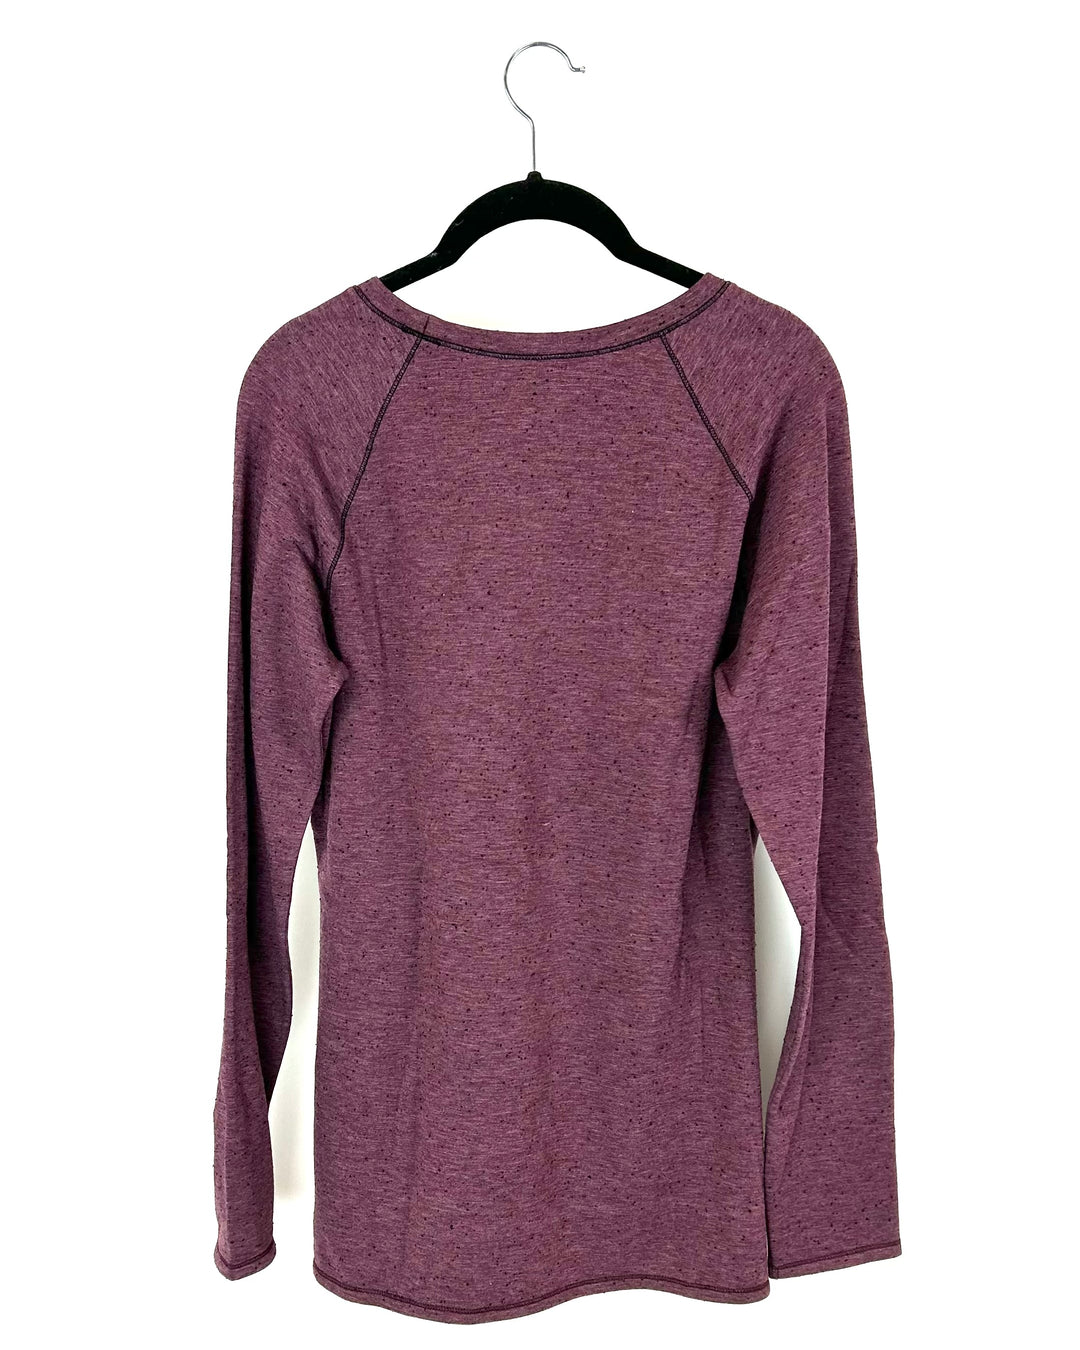 Burgundy and Black Long Sleeve Top - Size 8/10